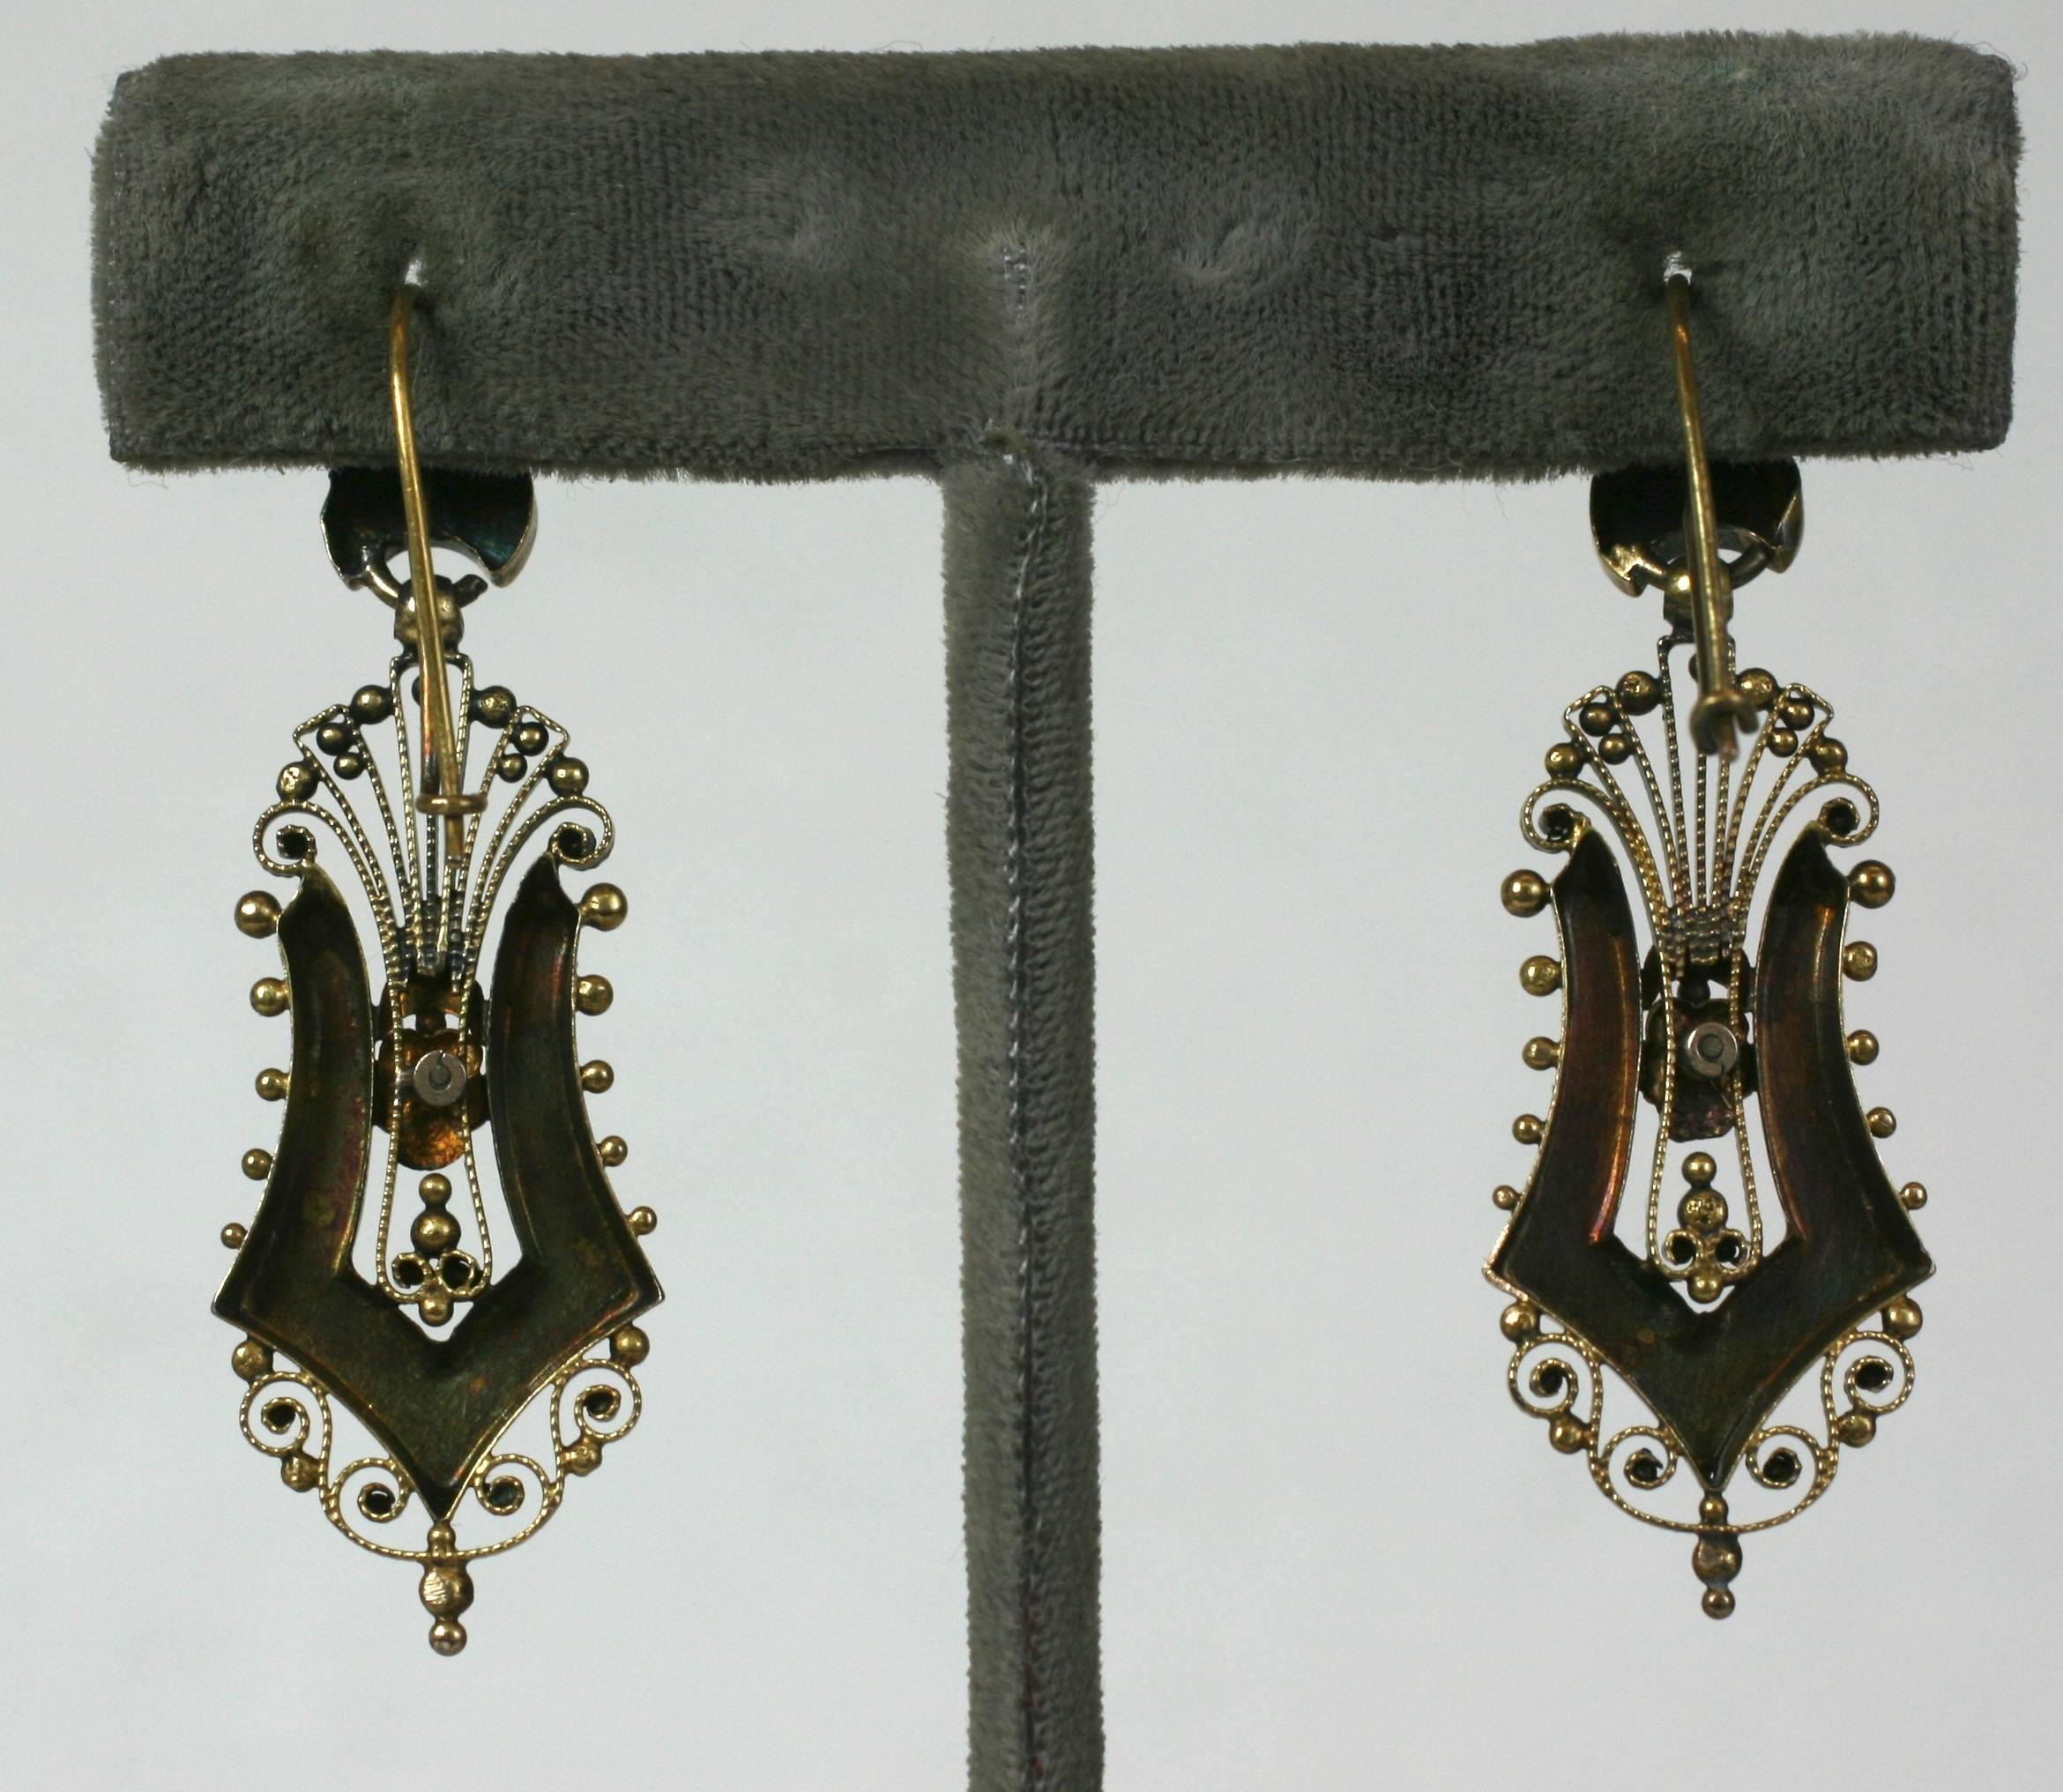 Elaborate filigreed Victorian 14k gold earrings from the late 19th Century. Rose gold applications in harp form are framed by etruscan bead work and florets. Yellow gold has been left with original patina. Can be polished to high finish if